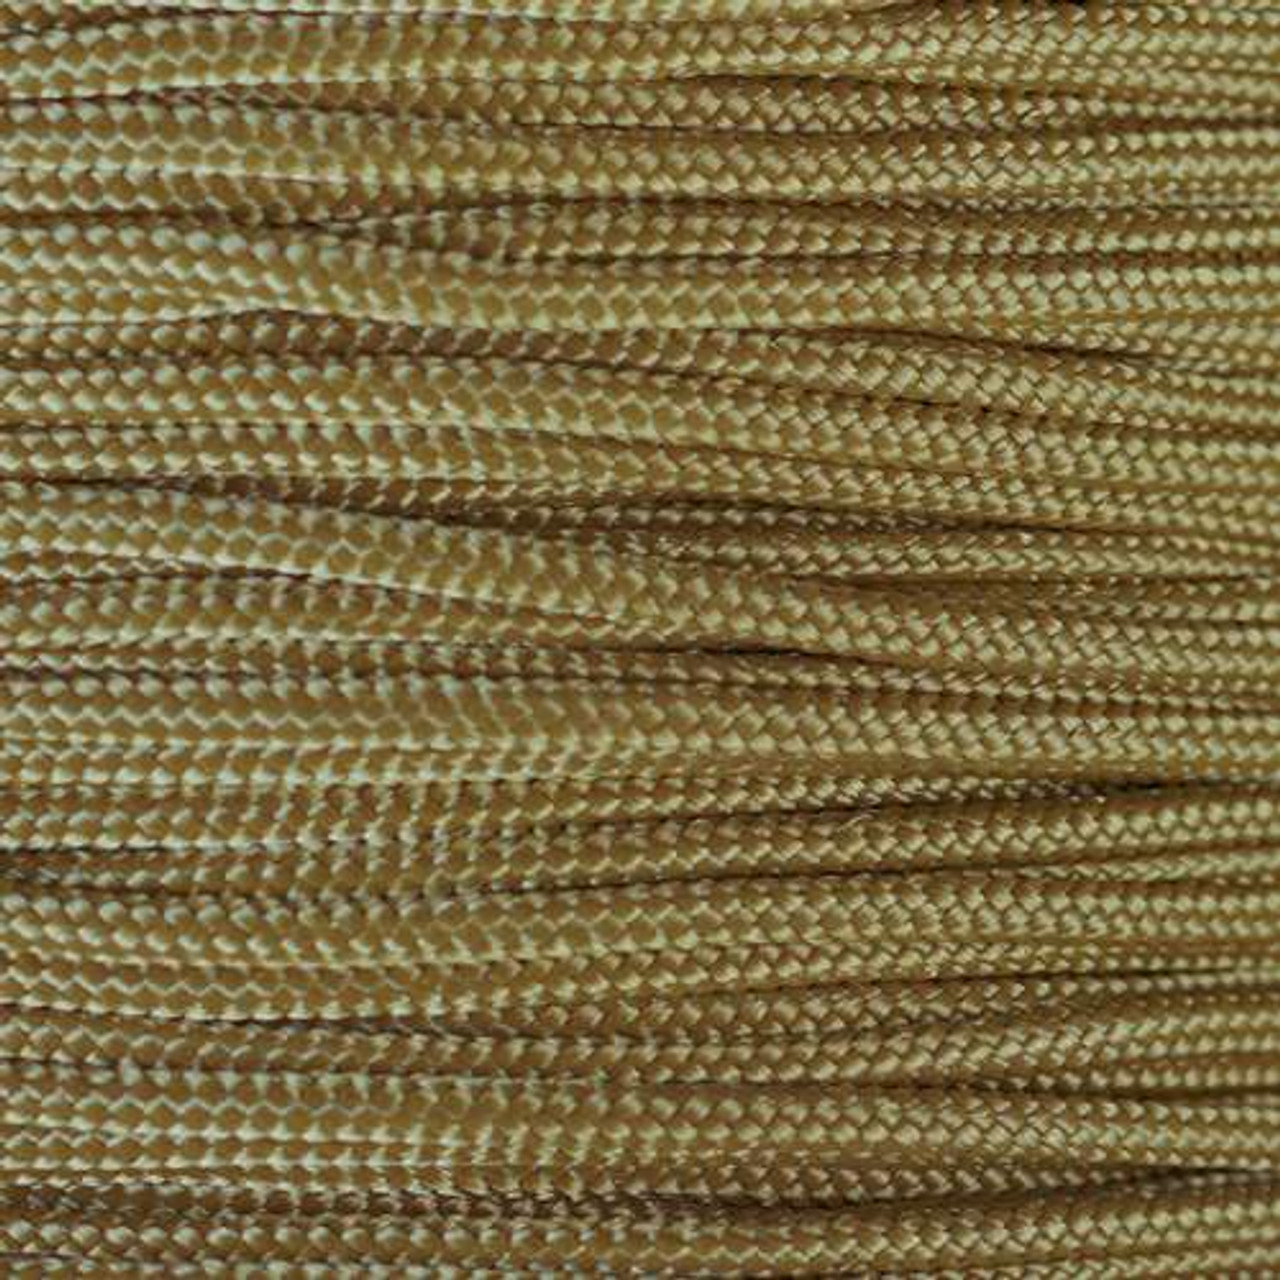 Coyote Brown - 325 Paracord - 100ft